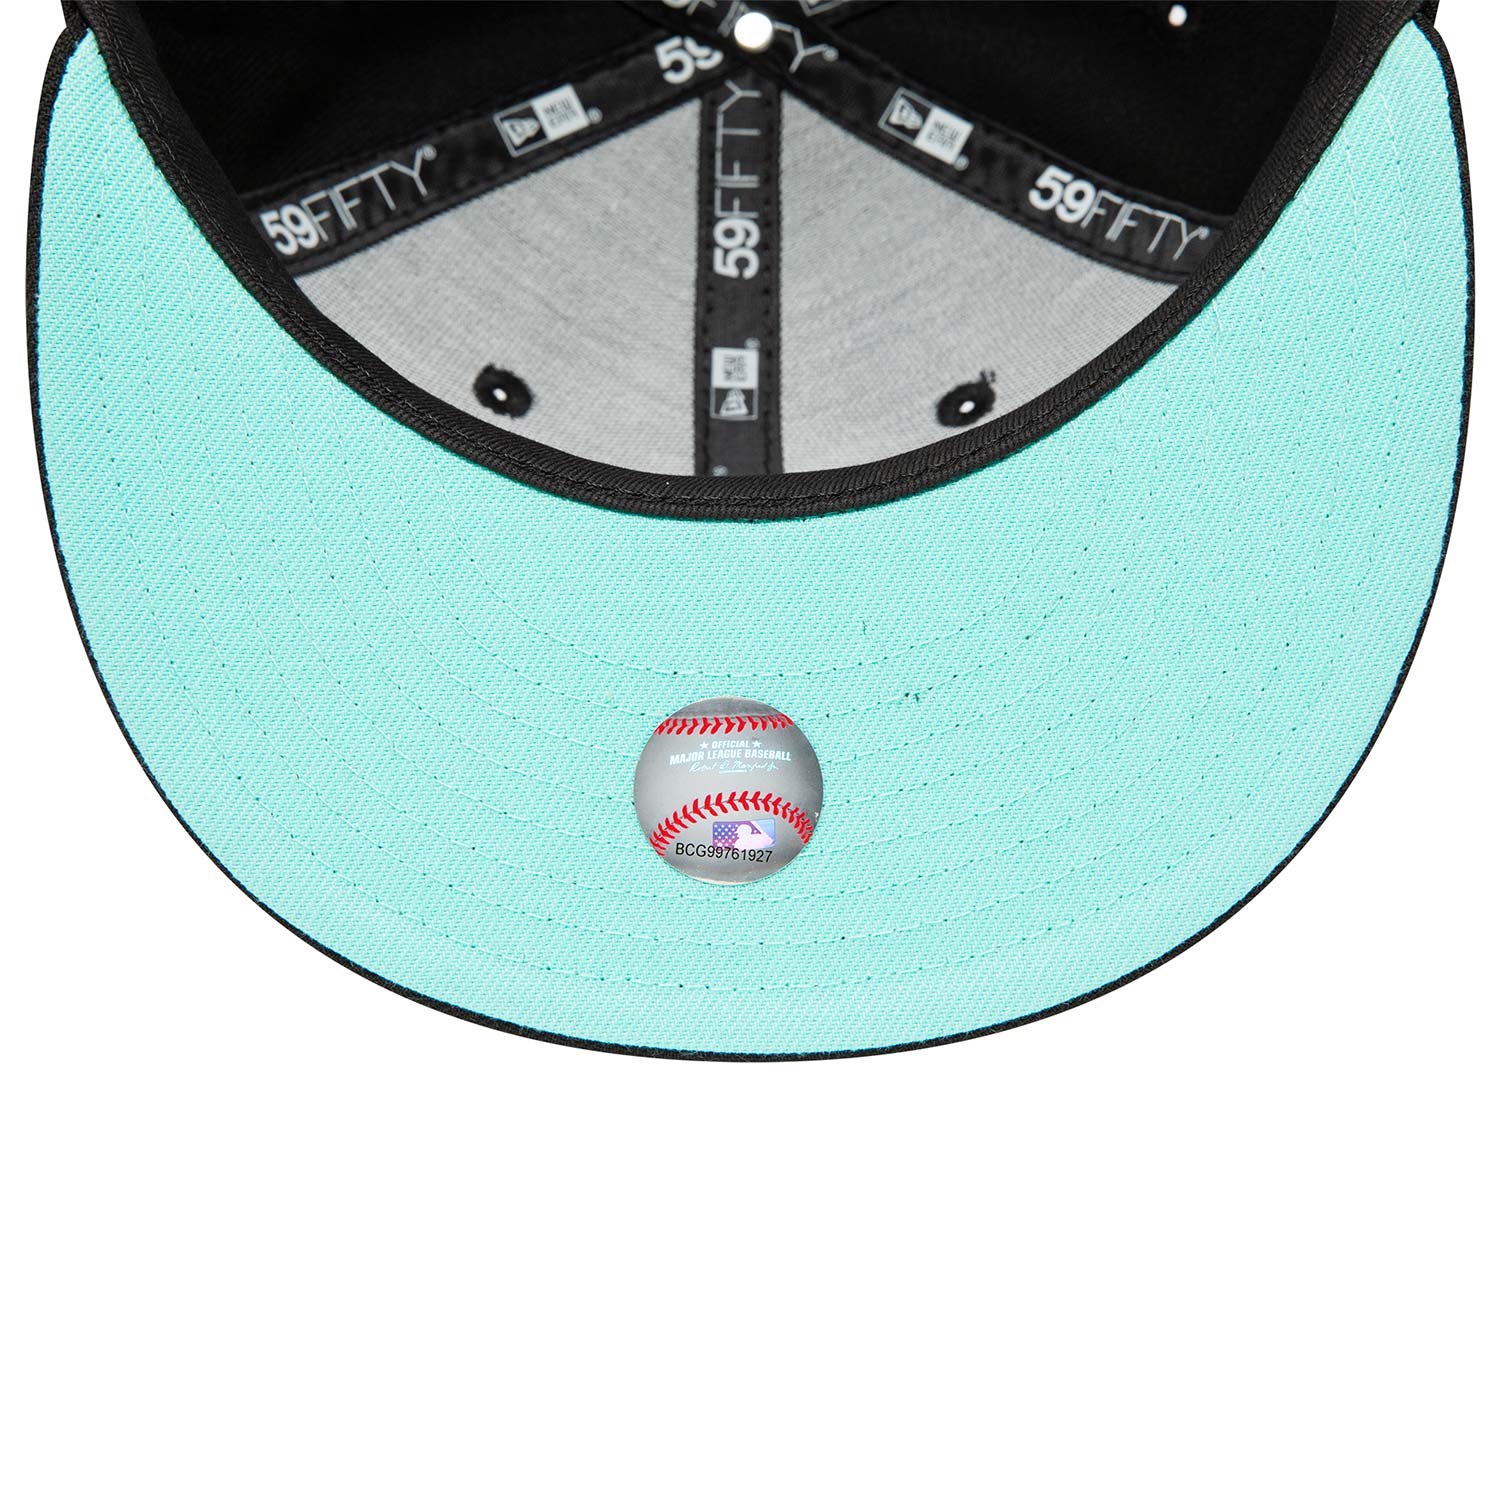 Boston Red Sox Black and Blue Tint 59FIFTY Fitted Cap